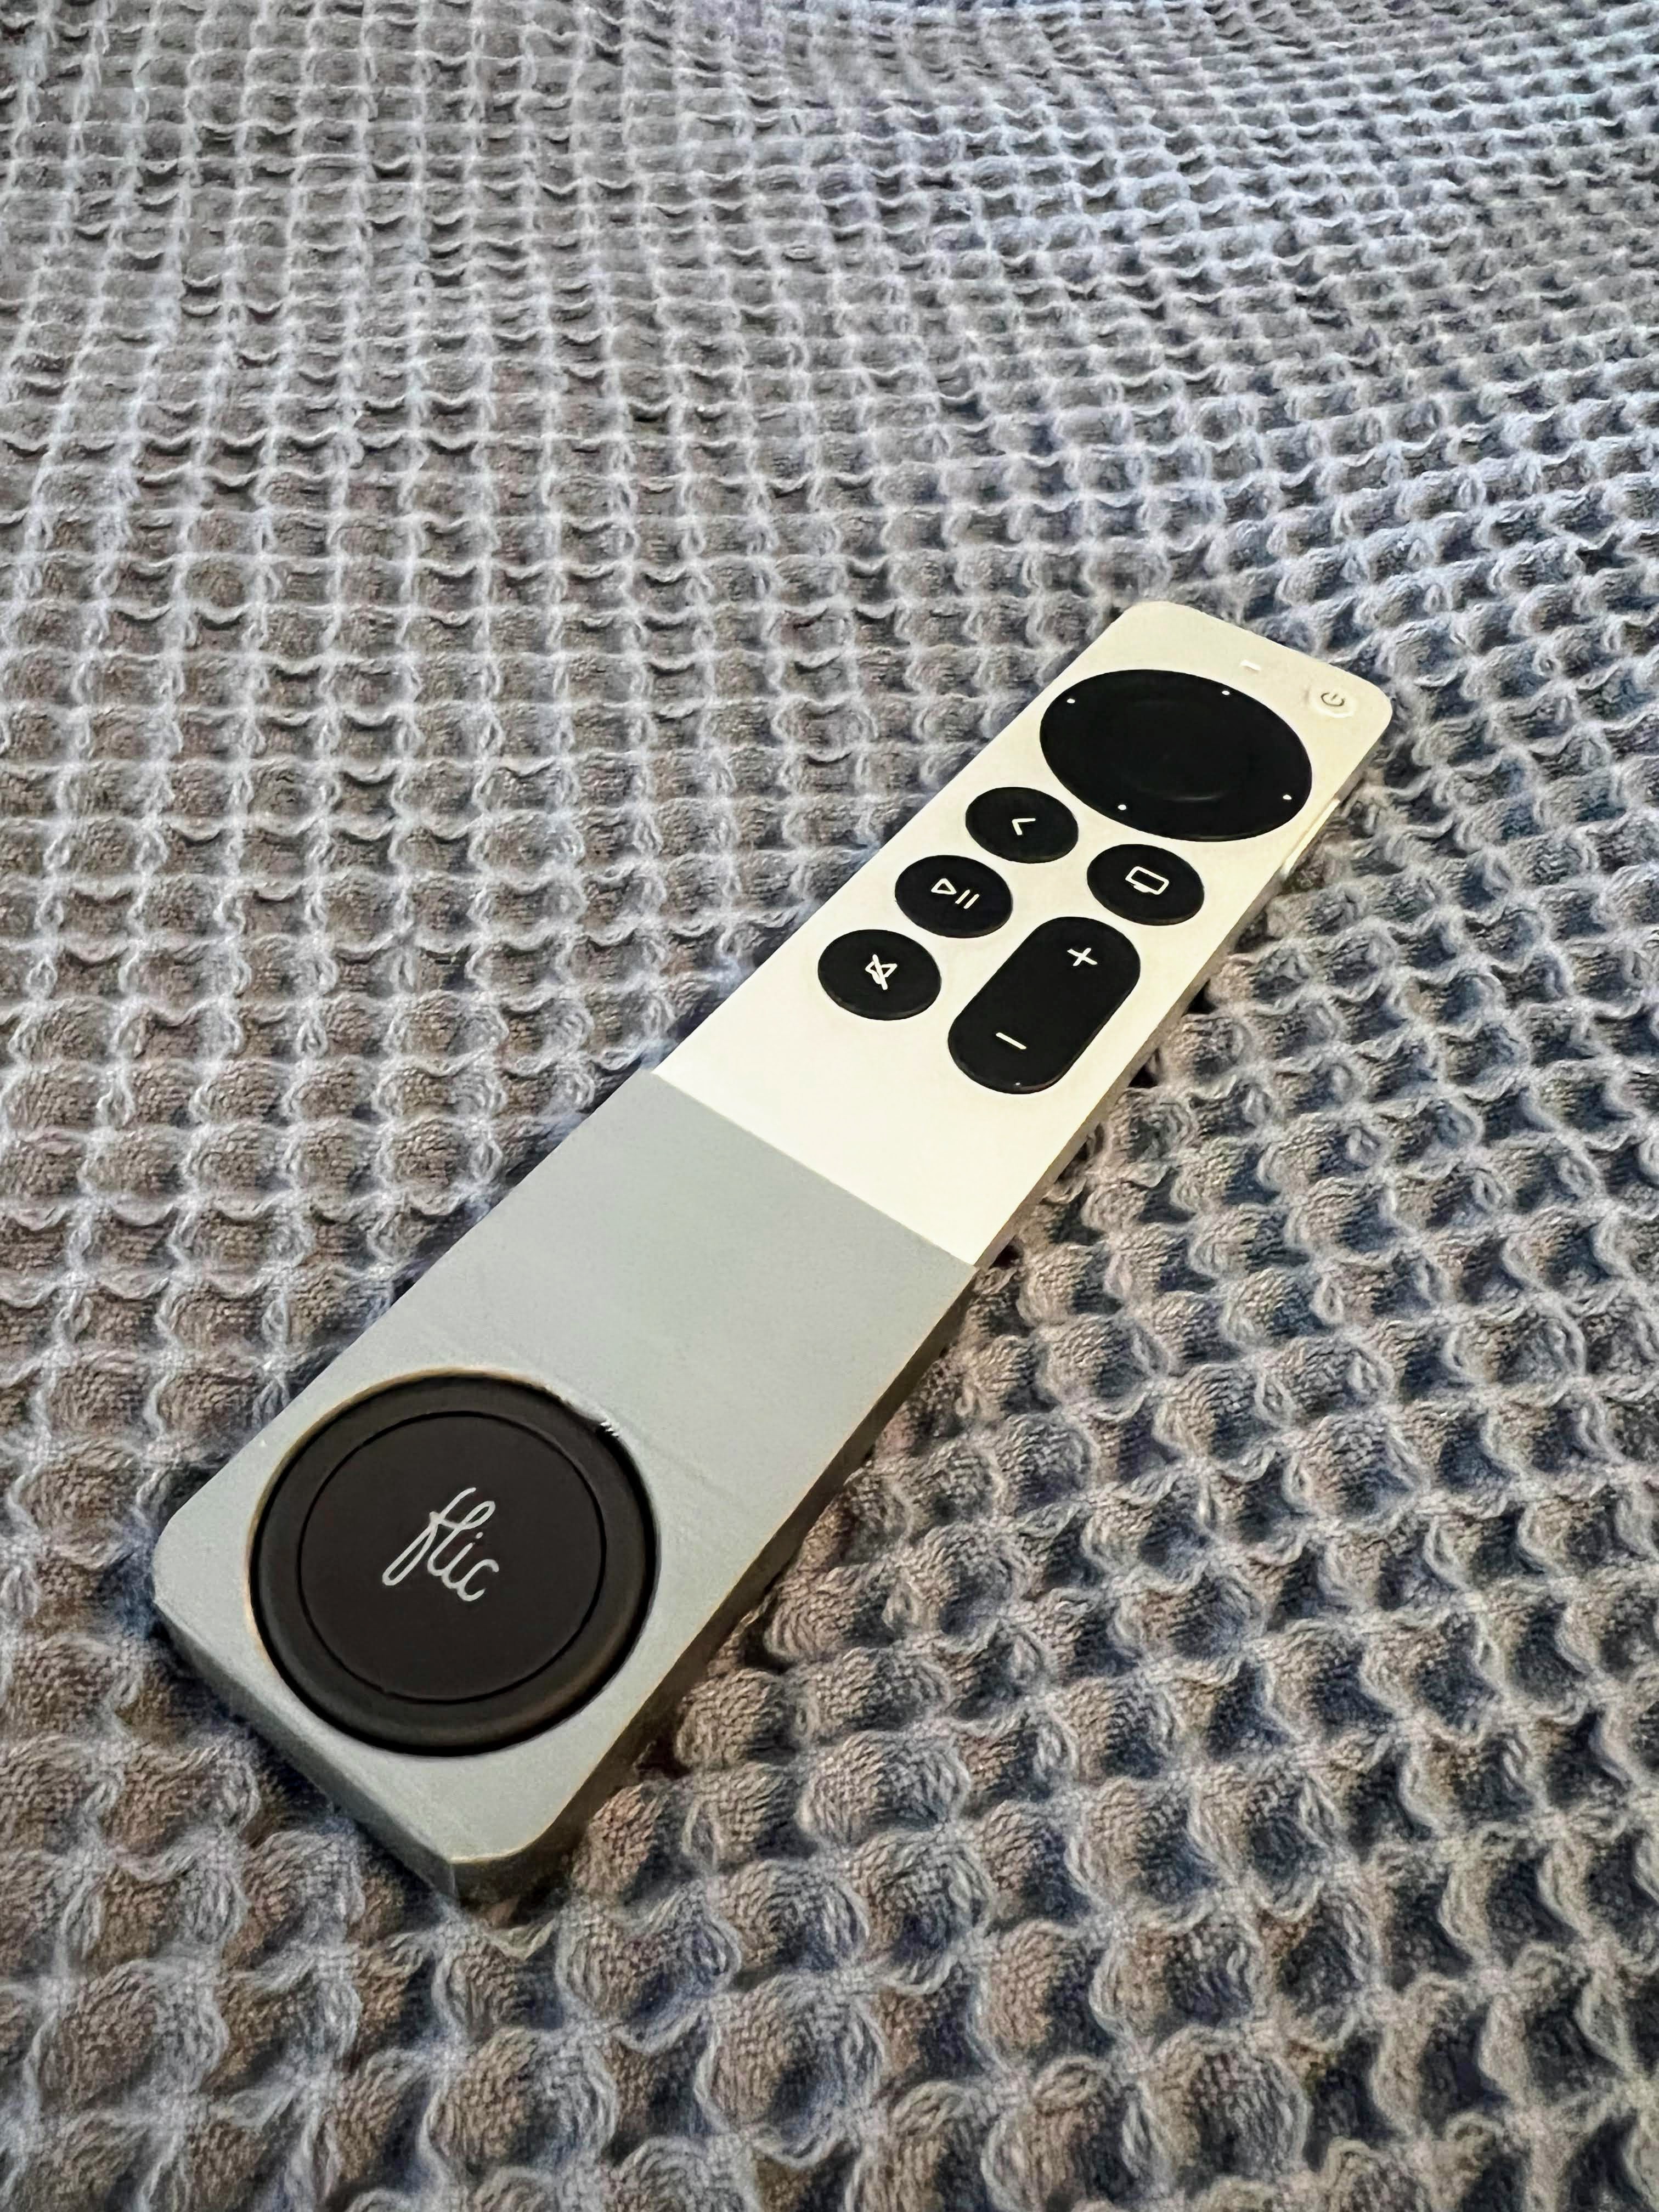 Flic Button Holder for Apple TV Remote